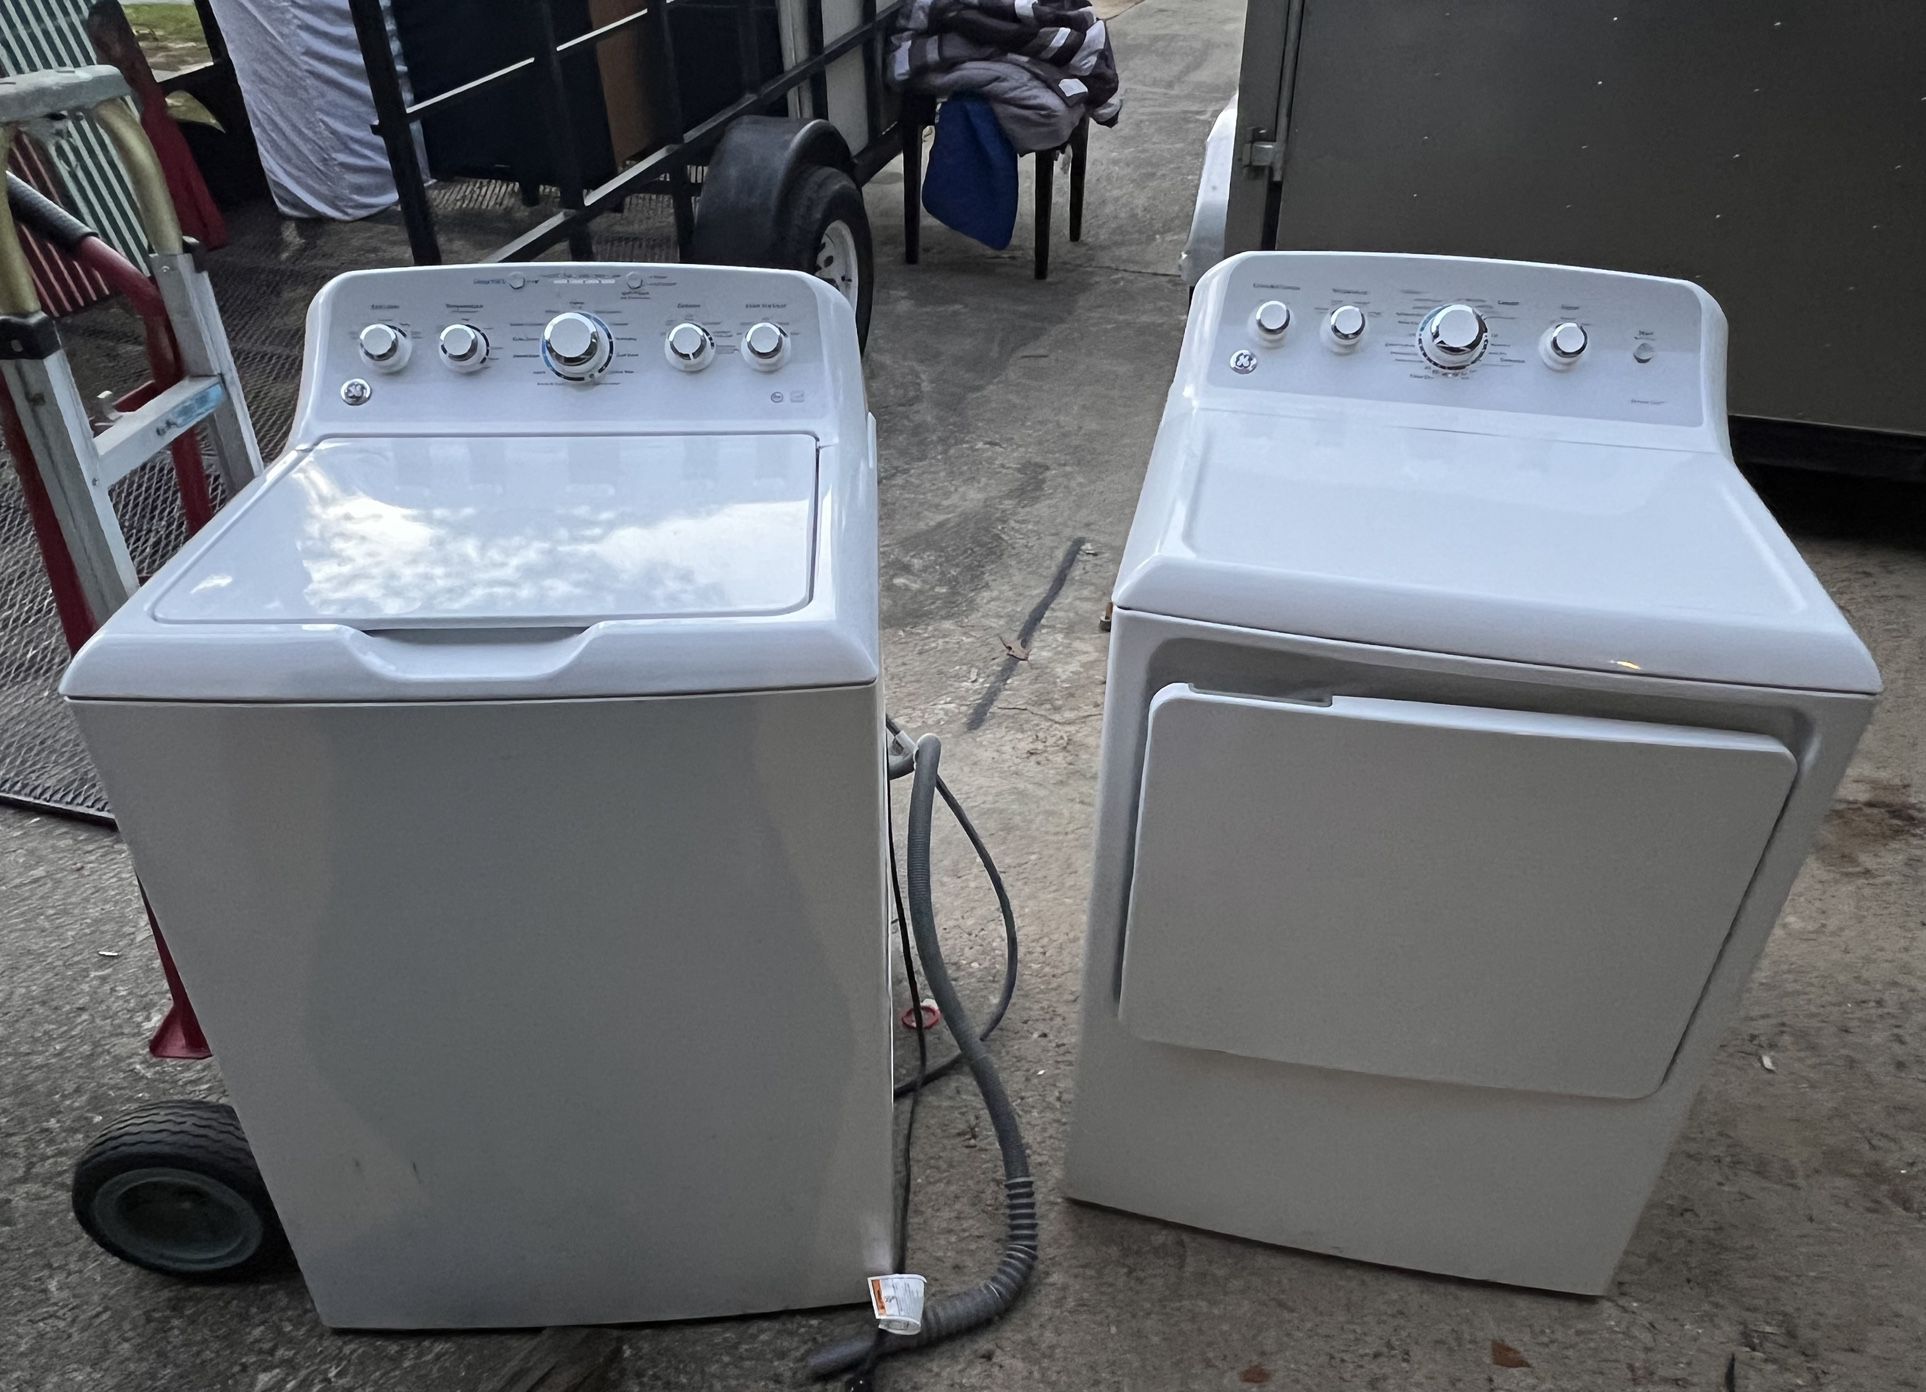 Gh Washer And Dryer Perfect Conditions$500